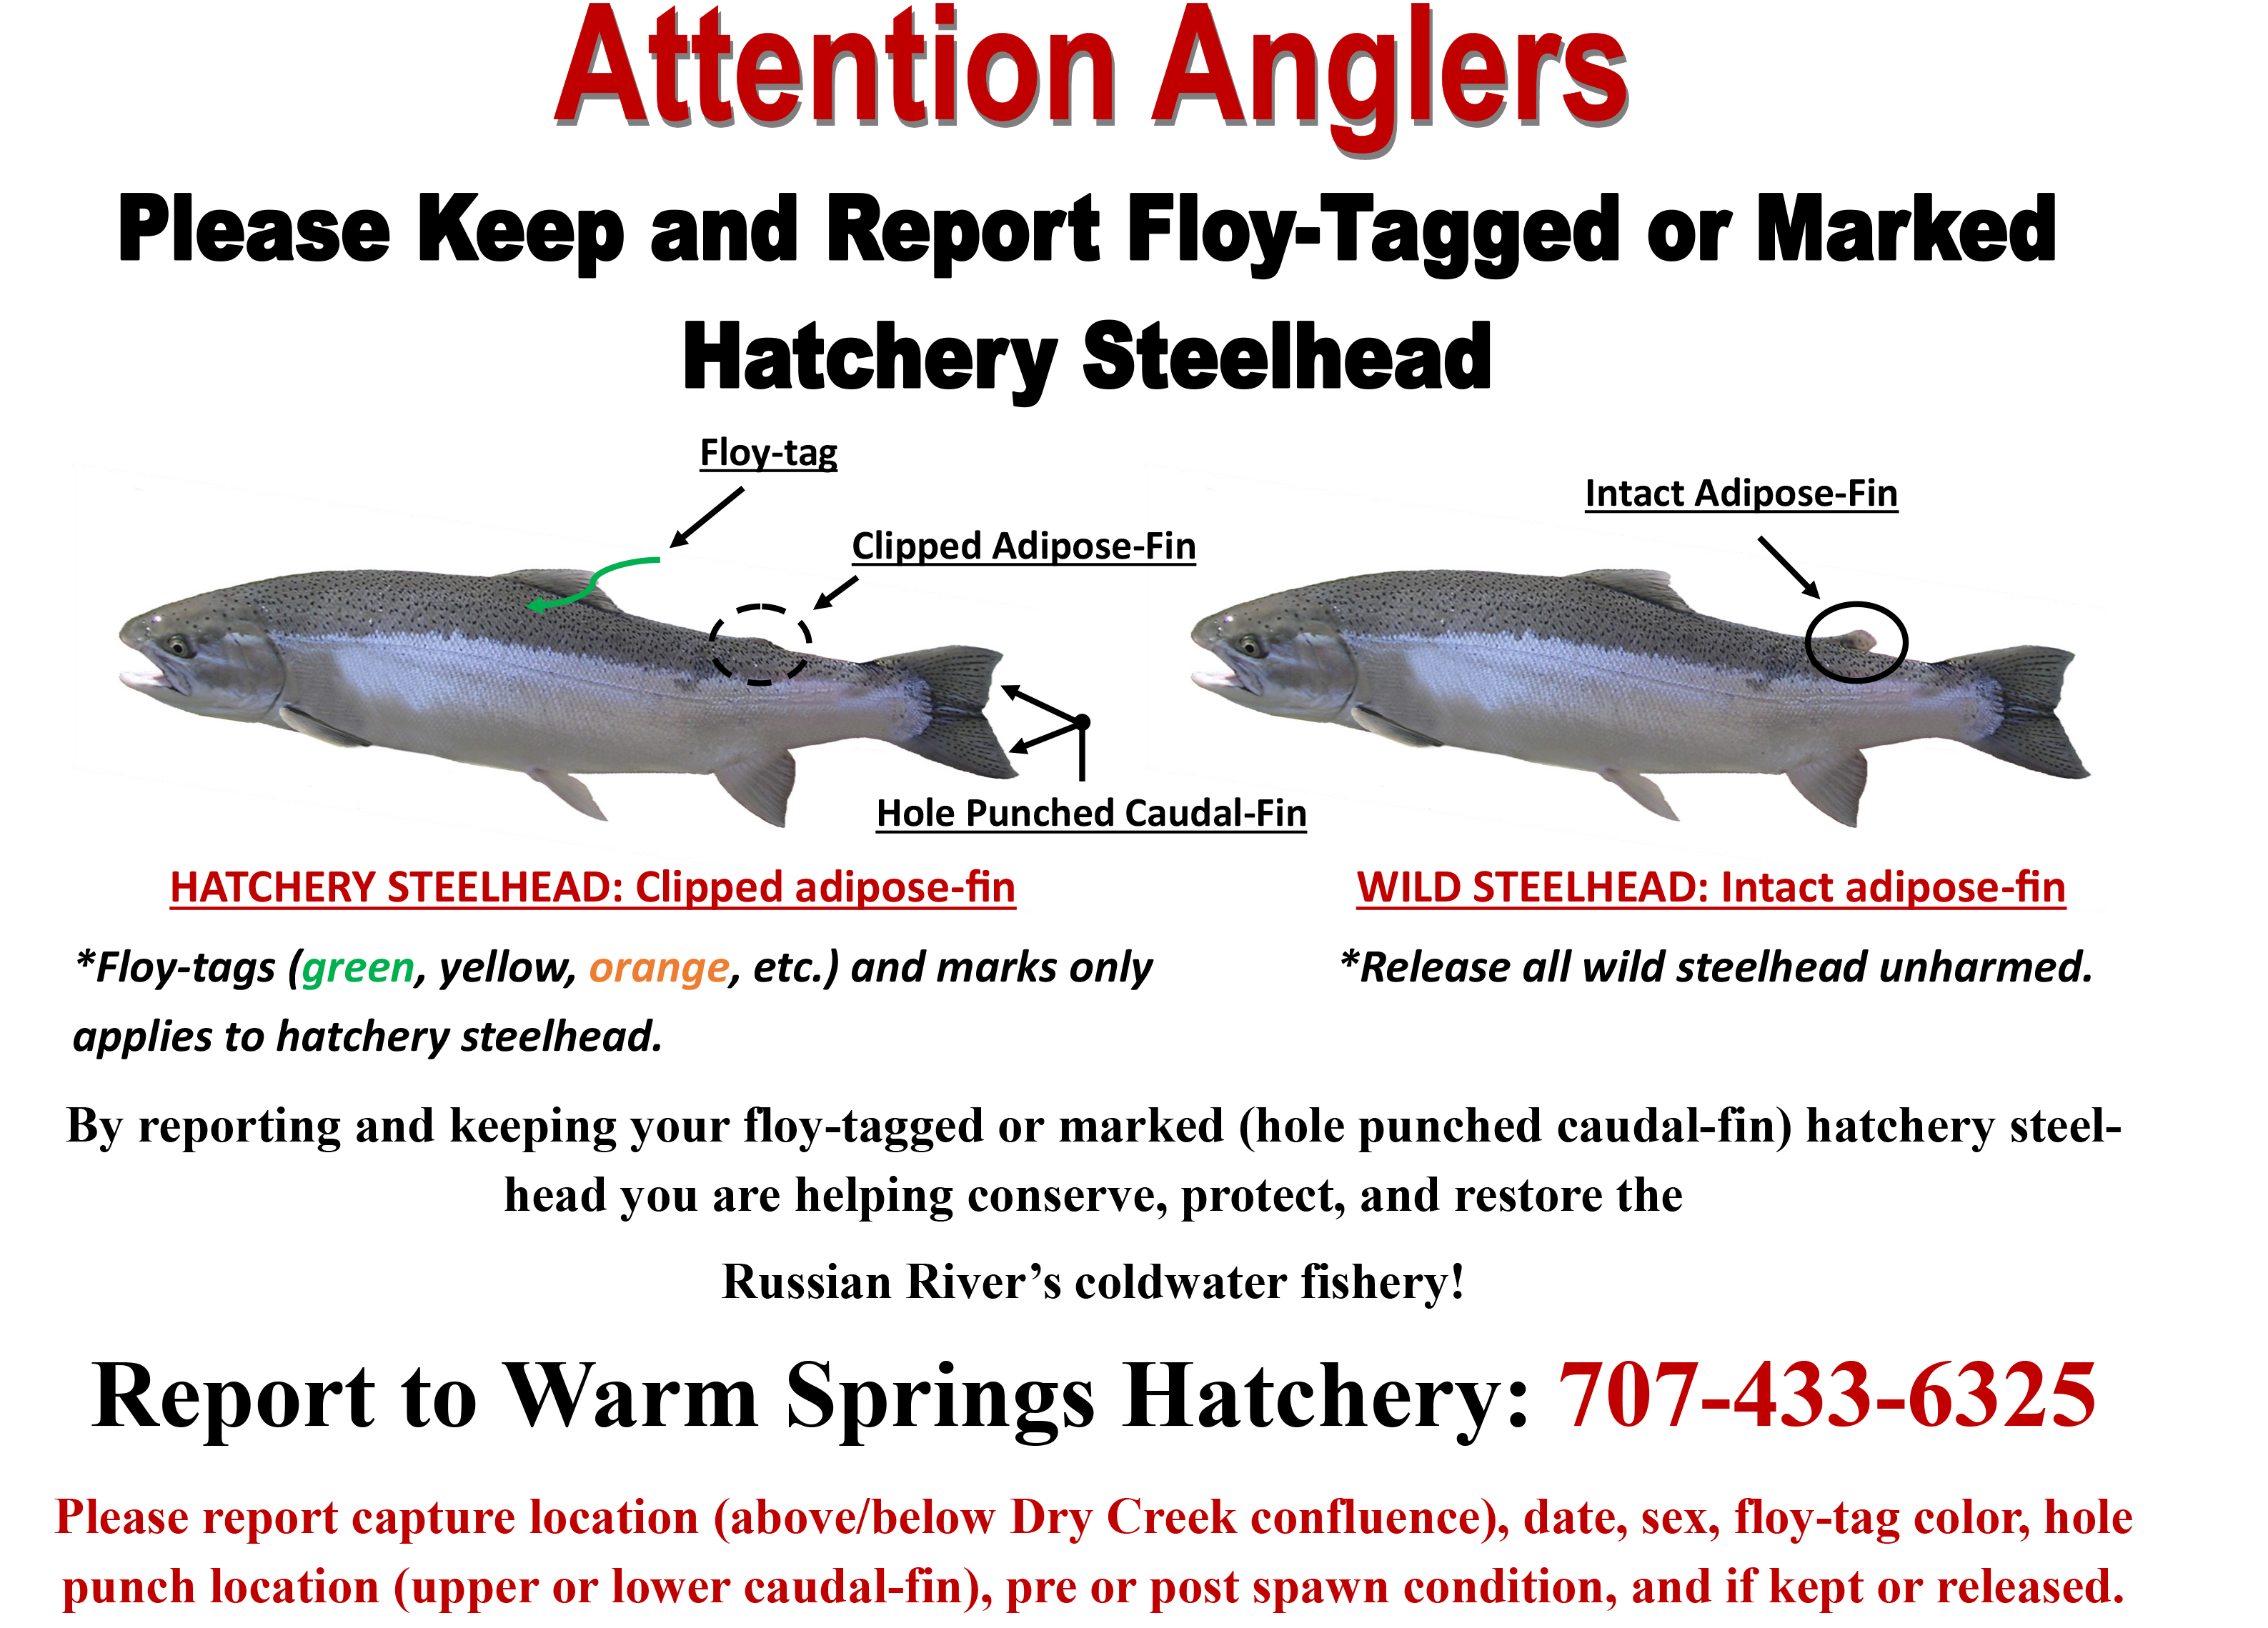 Attention anglers: please keep and report fly tagged or marked hatchery steelhead